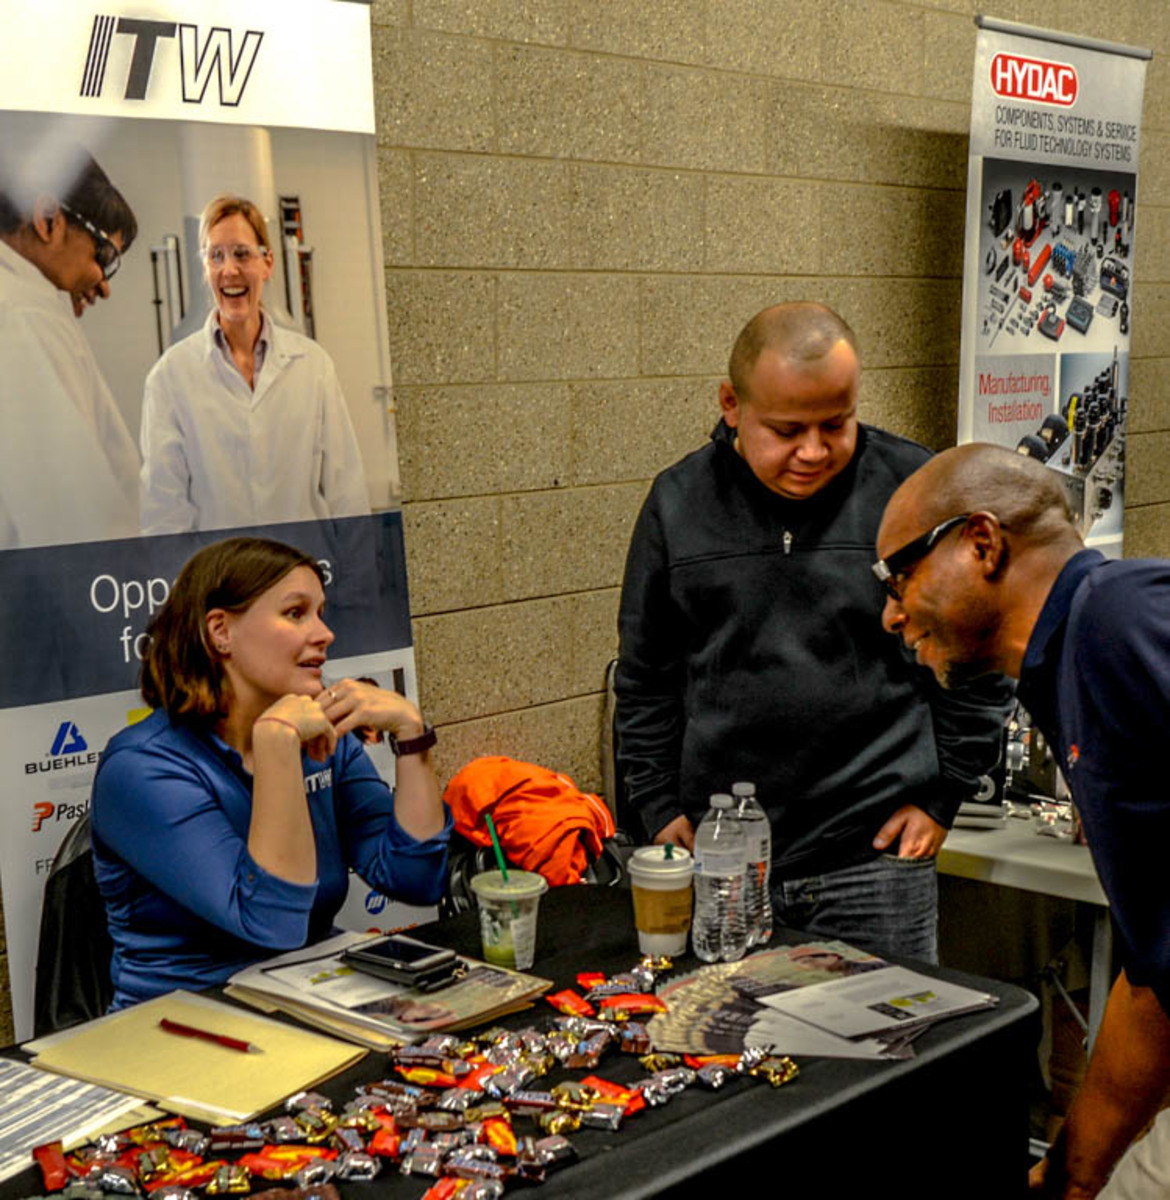 The Shakeproof Division of ITW (Illinois Tool Works) discusses job possibilities with visitors to the Job and Career Fair in Building O on Oct. 25.